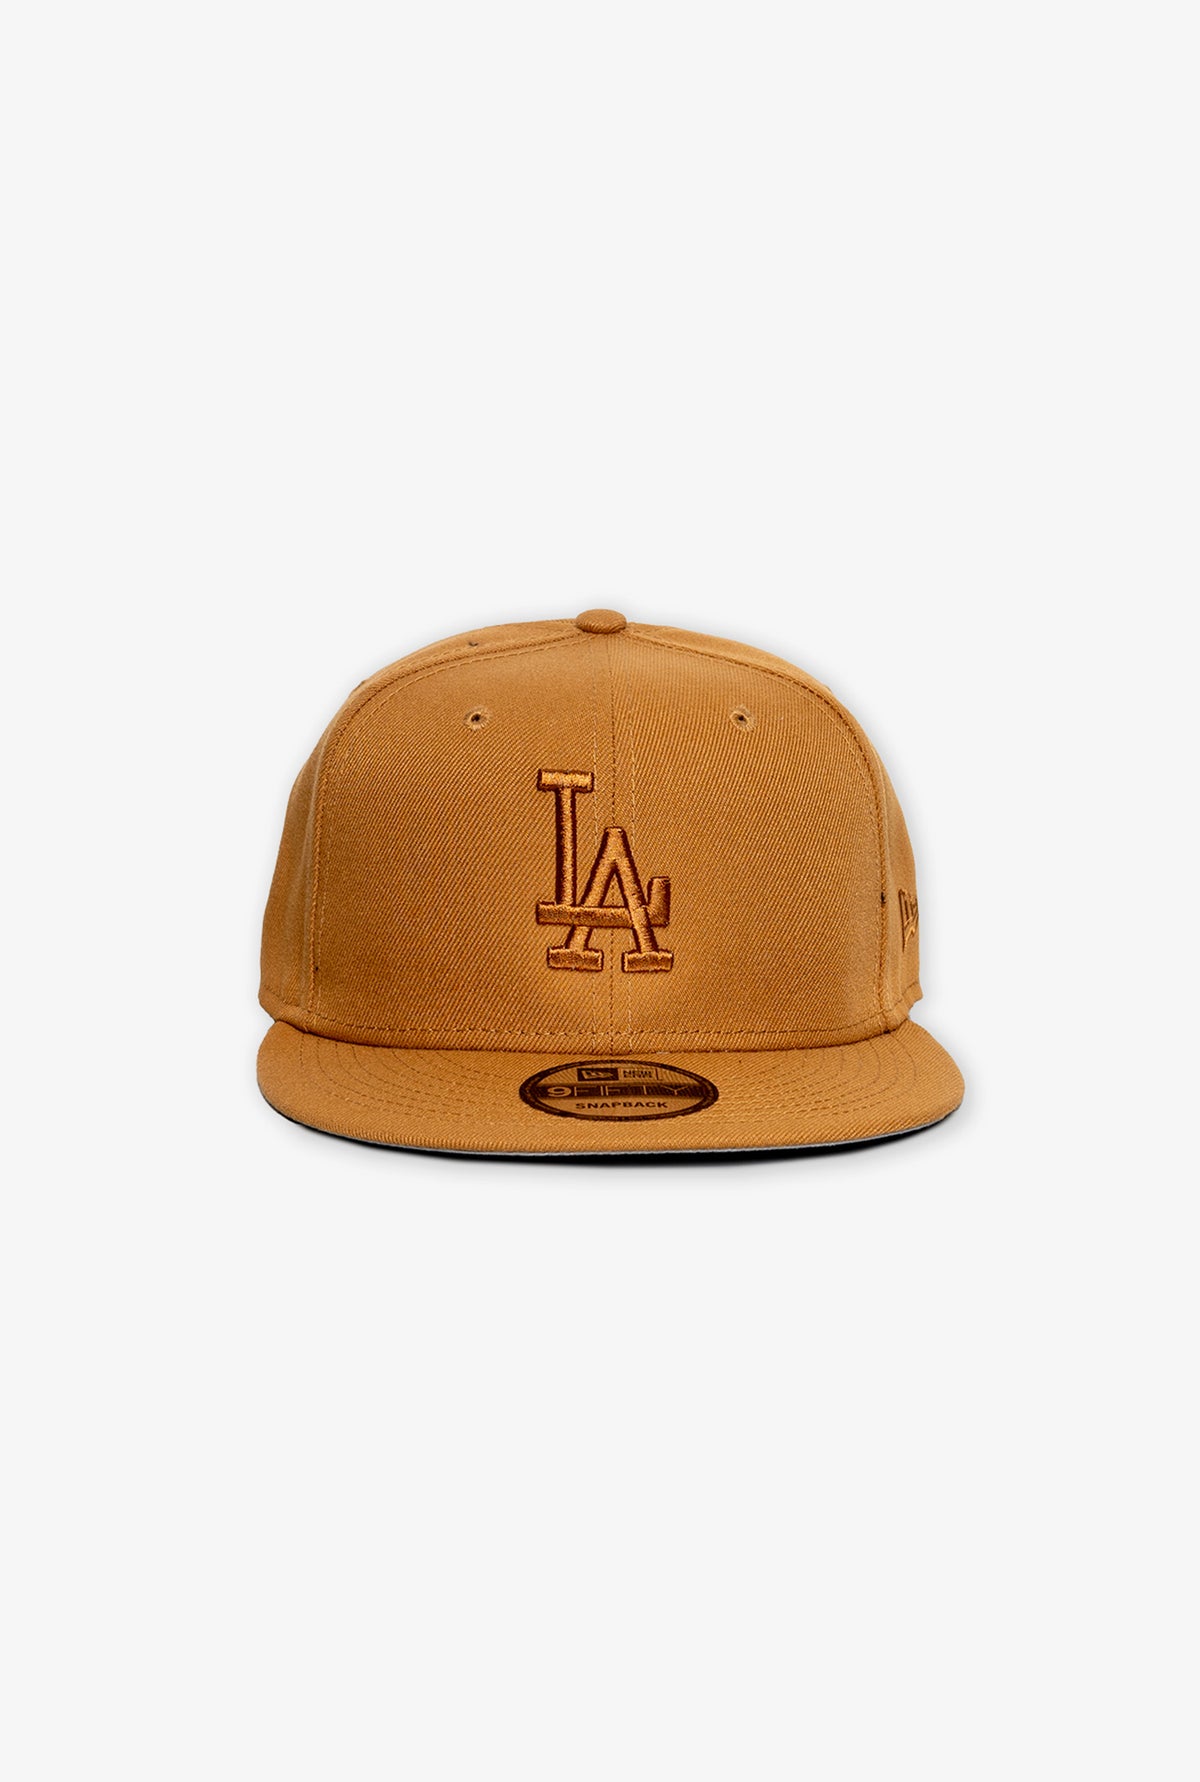 Los Angeles Dodgers 9FIFTY Color Pack Snapback - Tan